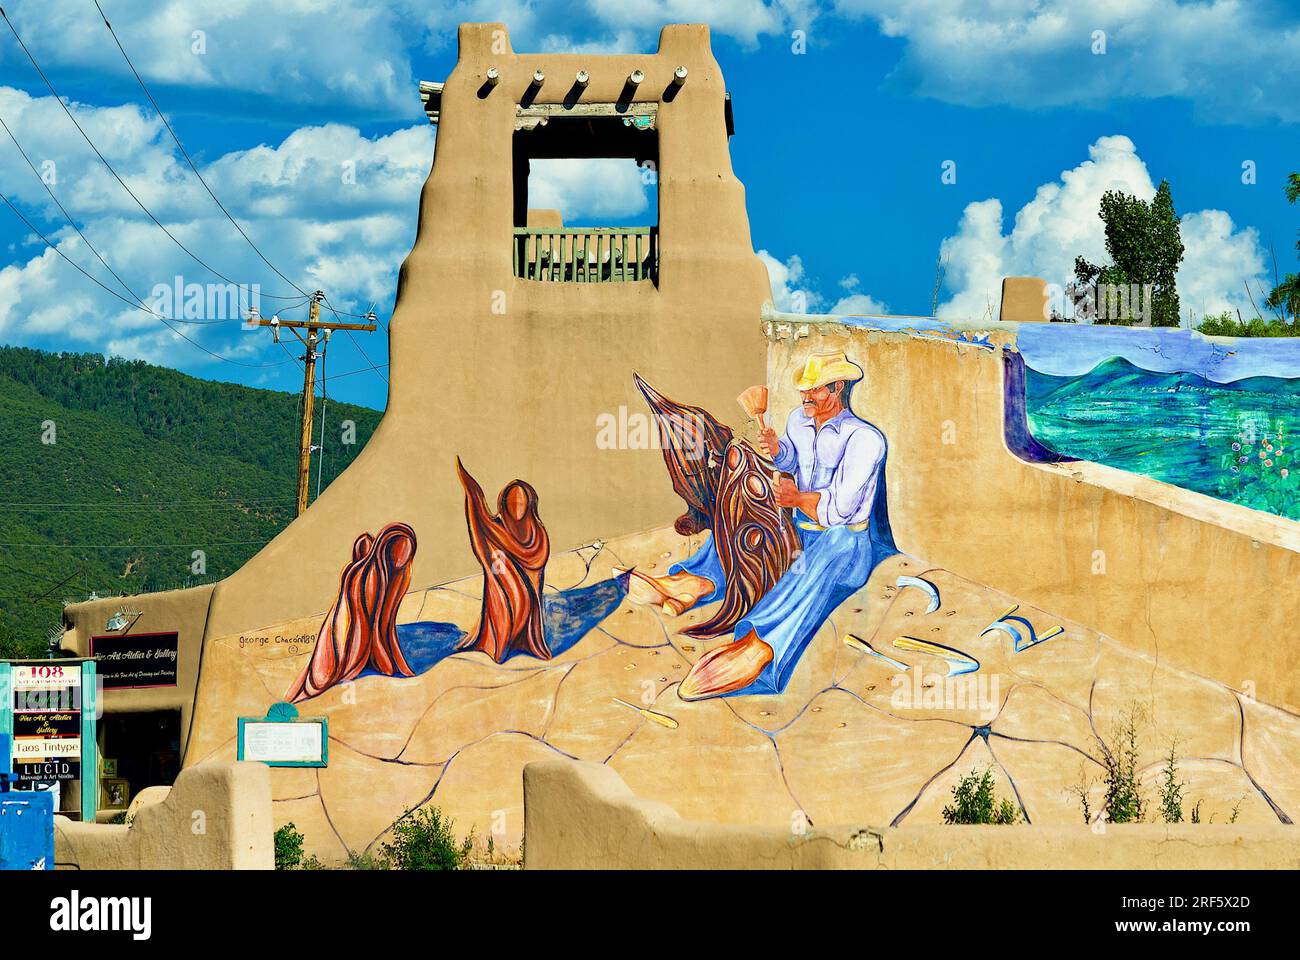 Taos, New Mexico, USA - July 23, 2023: A colorful scene is painted on a traditional adobe building near the Taos Plaza in historic downtown Taos. Stock Photo